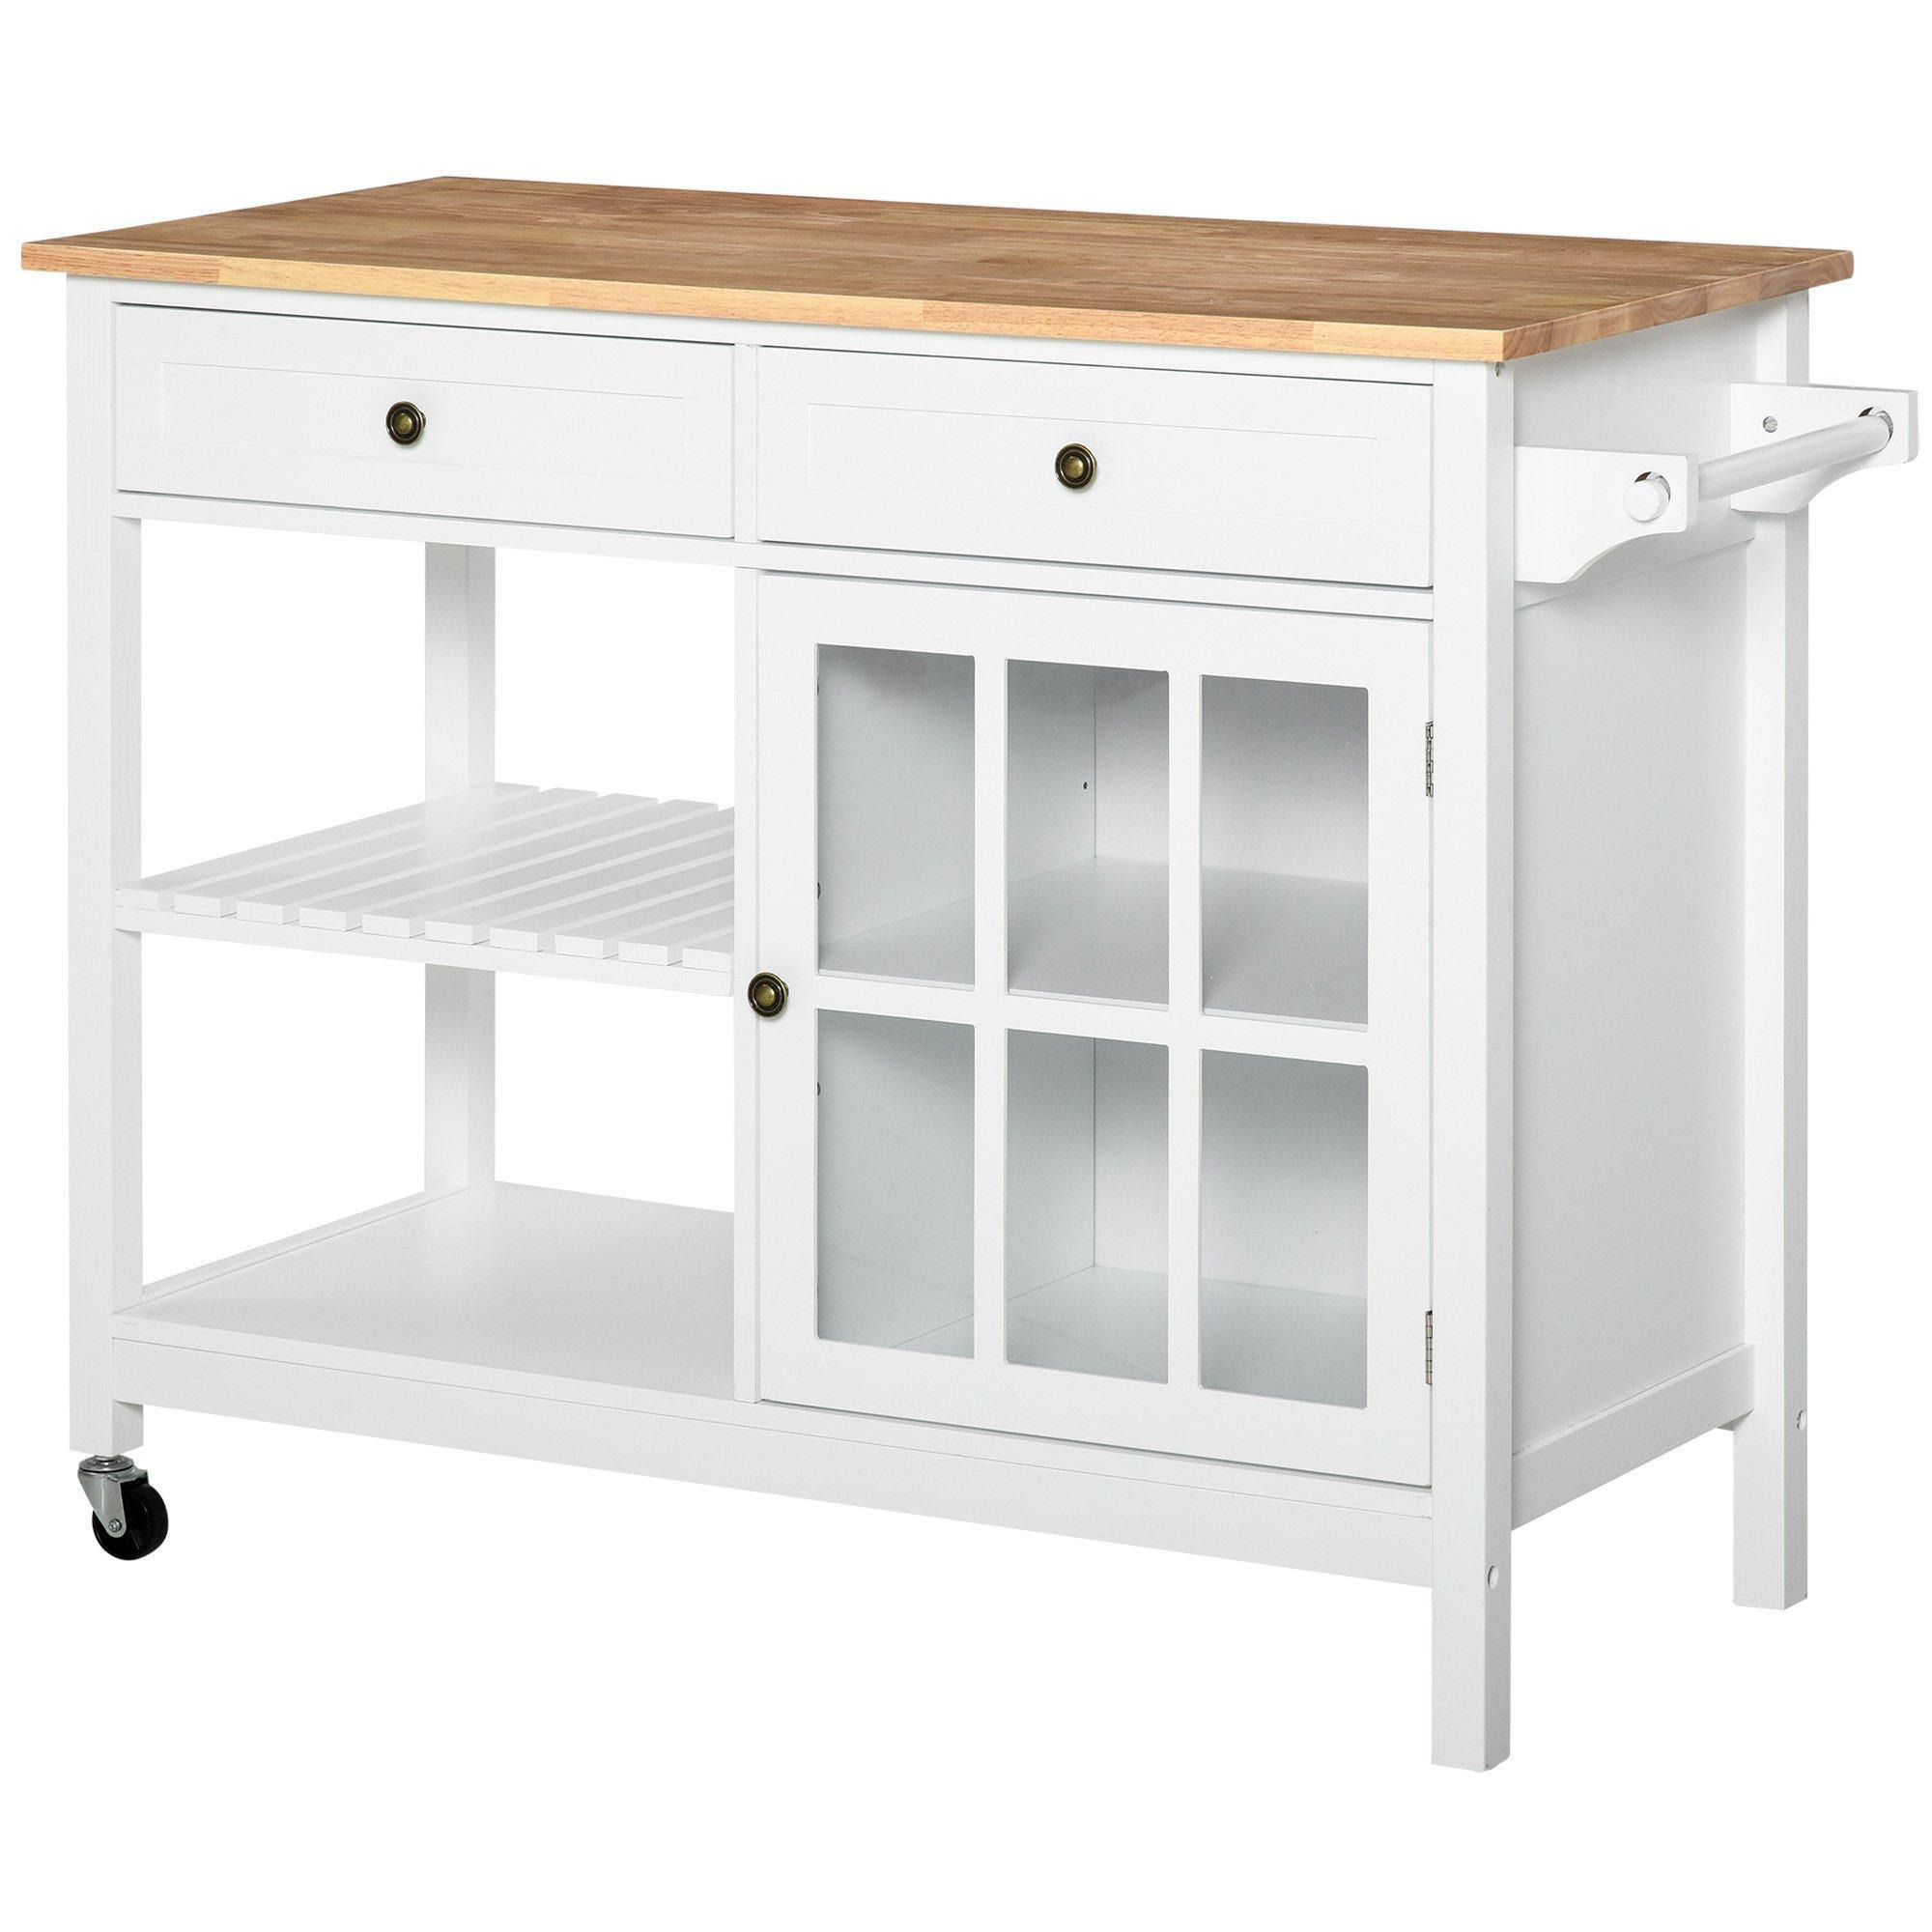 Rolling Kitchen Trolley Storage Serving Cart with Rubber Wood Top - image 1